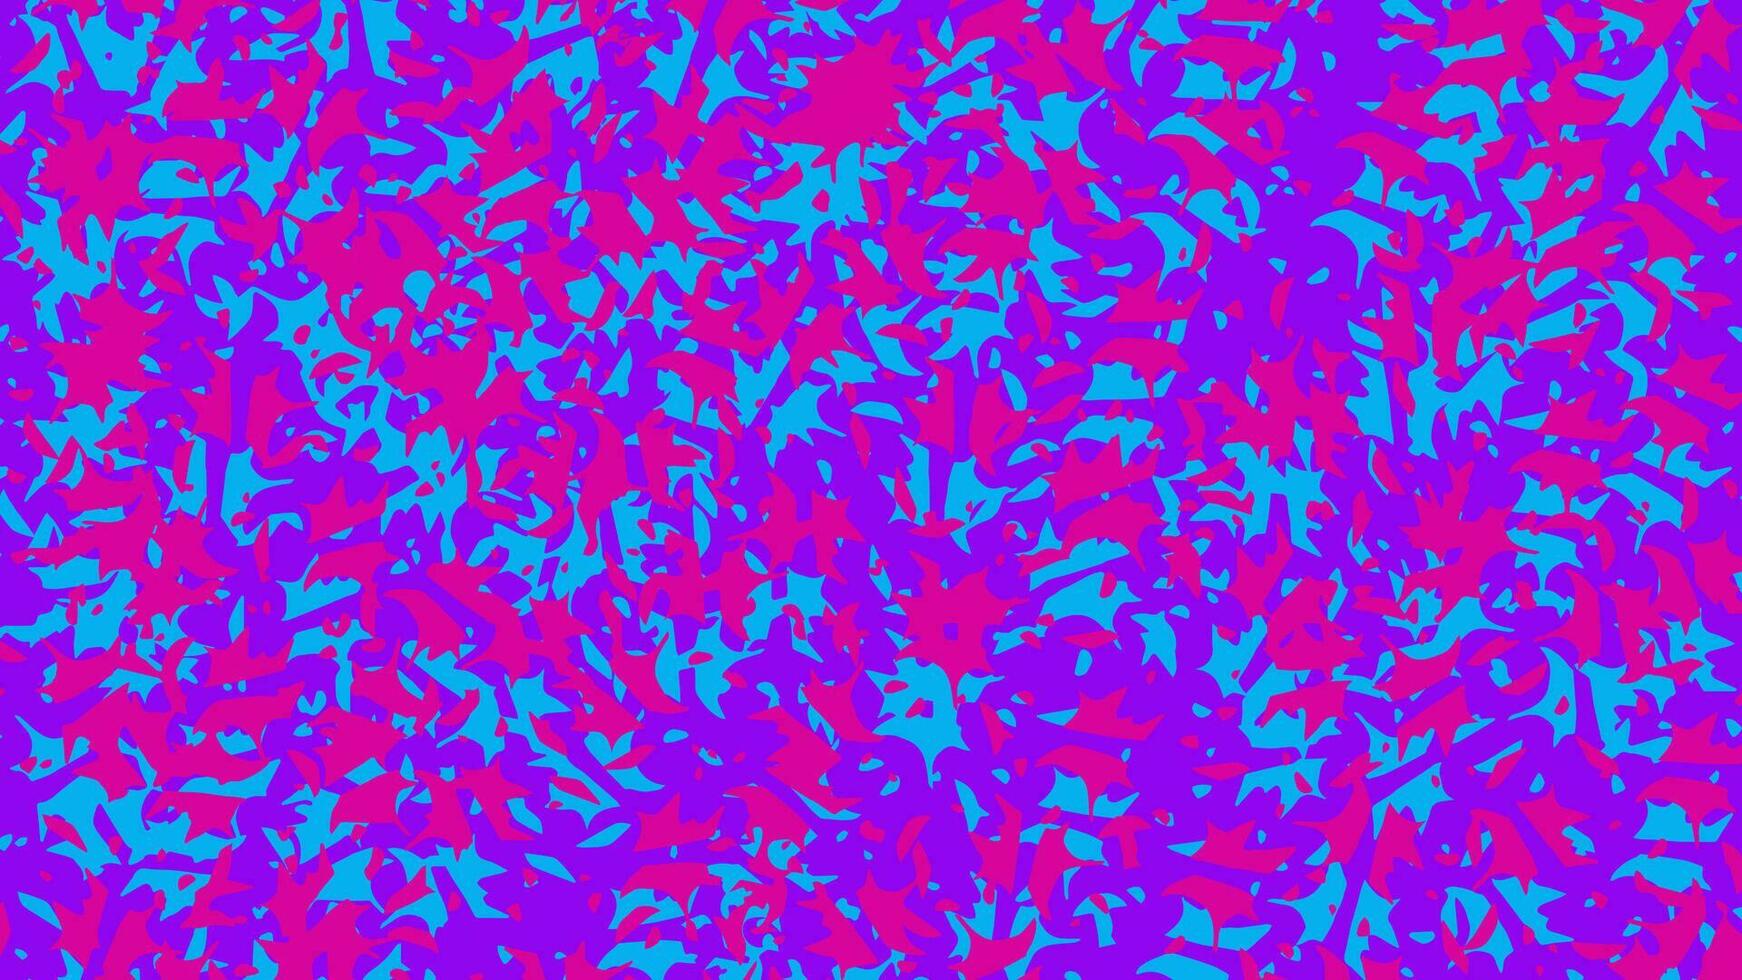 Abstract background of simple shapes in violet-blue-pink-turquoise colors. Vector illustration